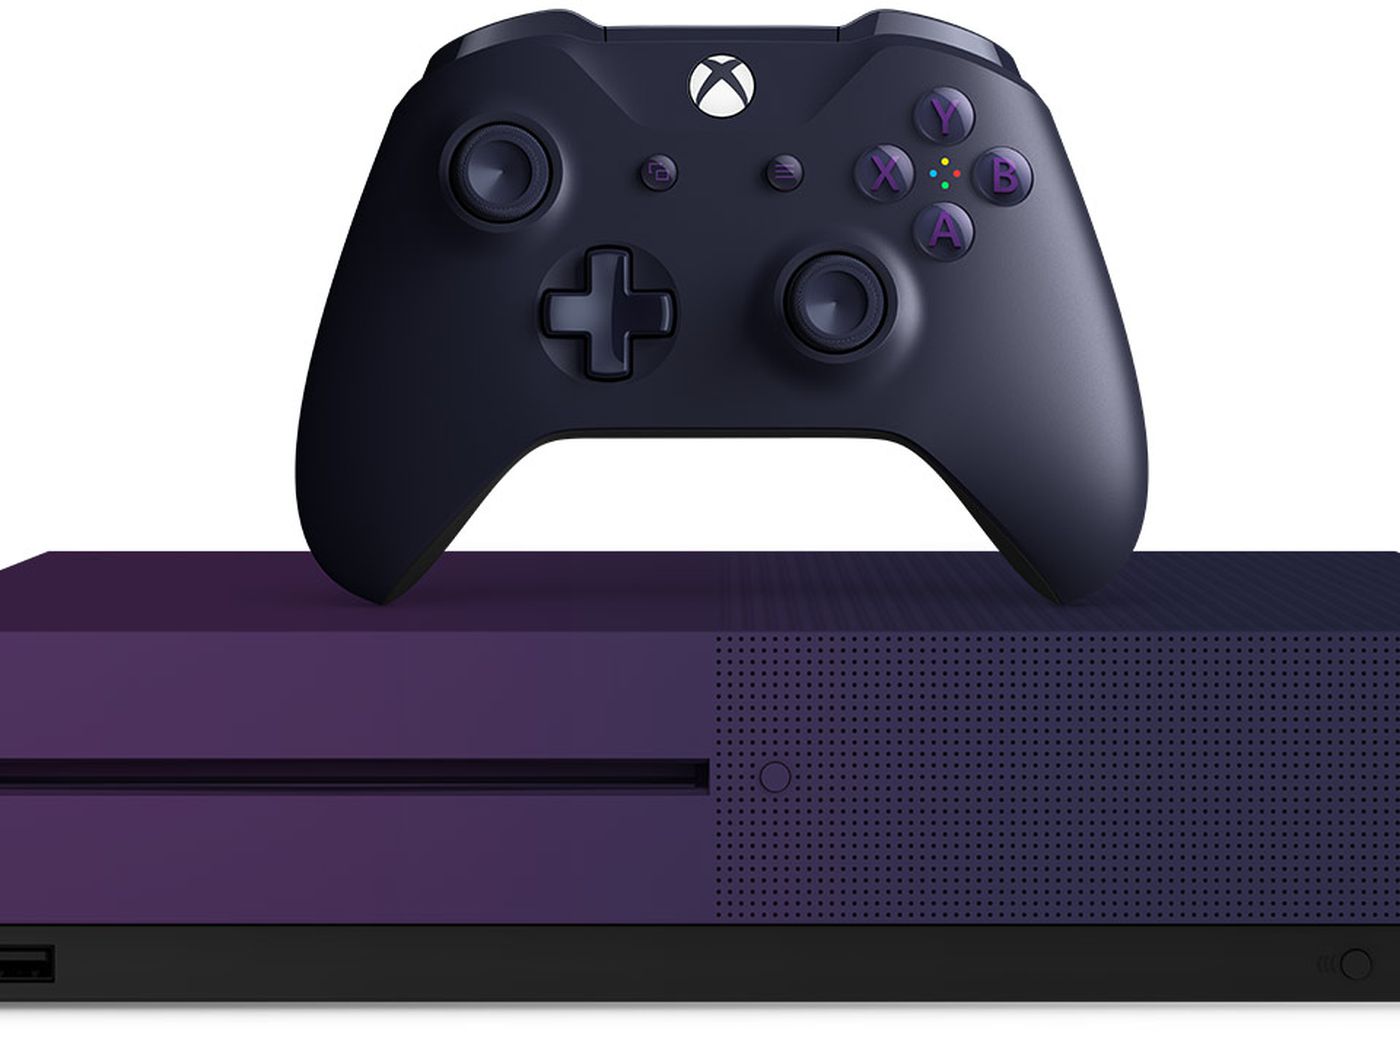 New Fortnite edition purple Xbox S will go sale on June 7th - The Verge